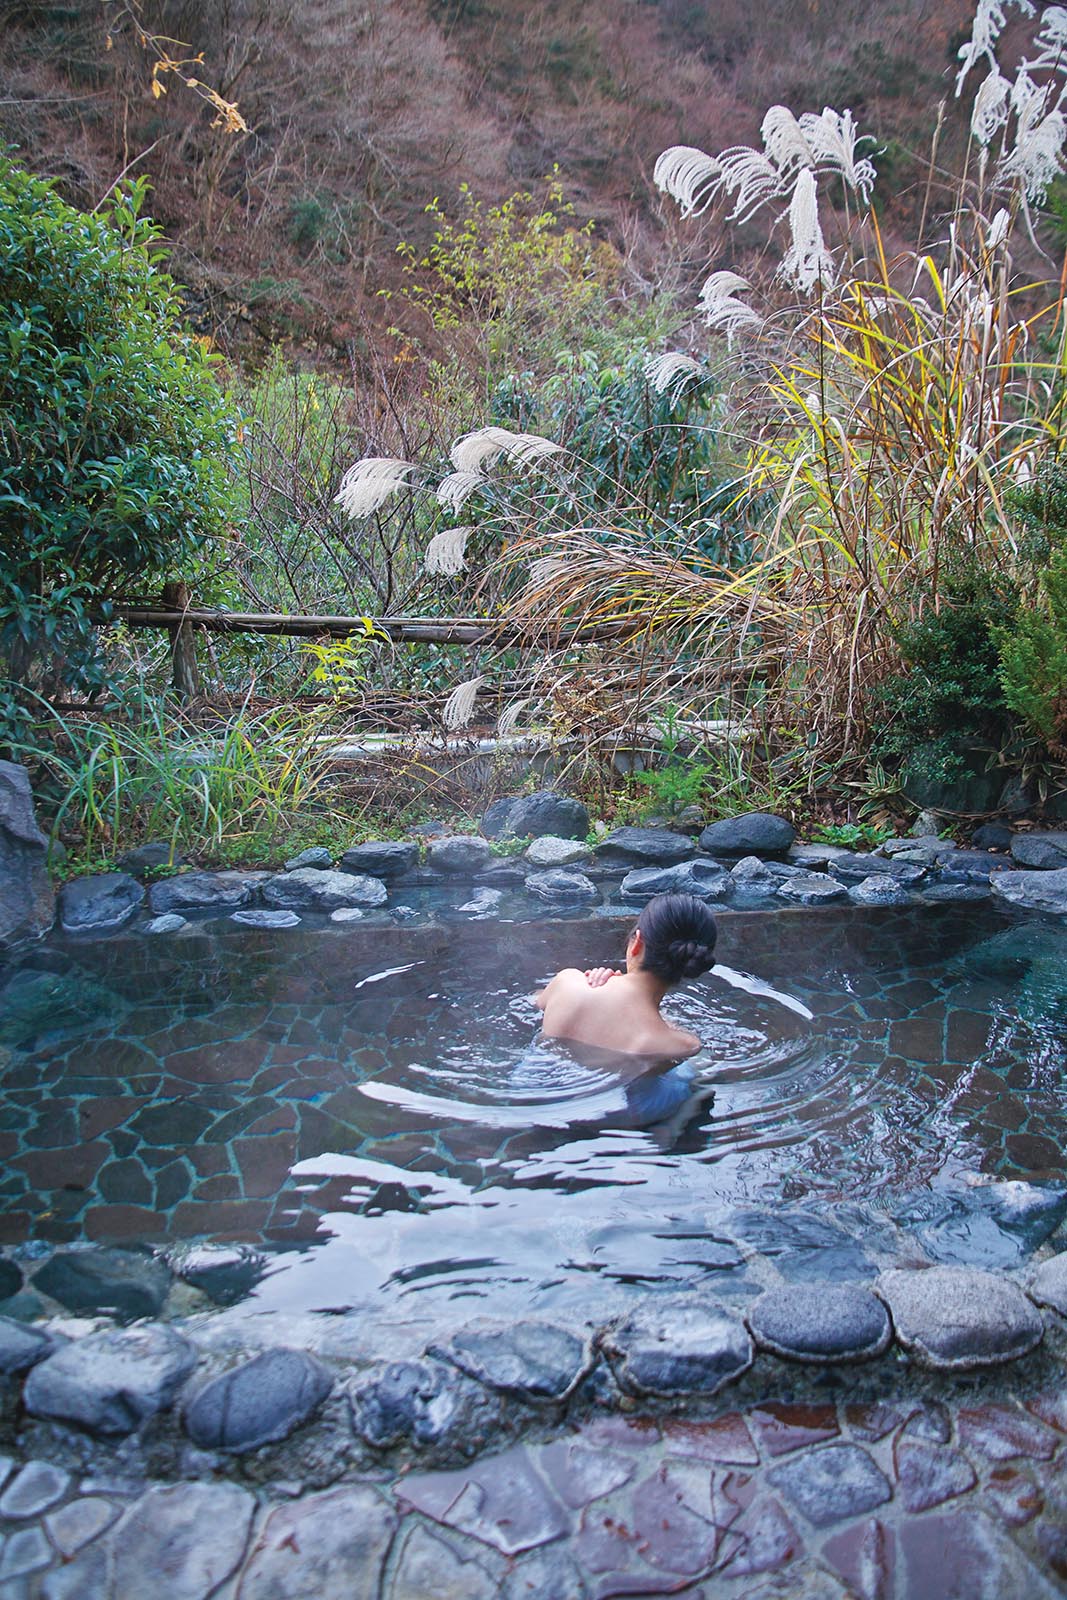 The 600-year-old hot spring at Dukgu in South Korea